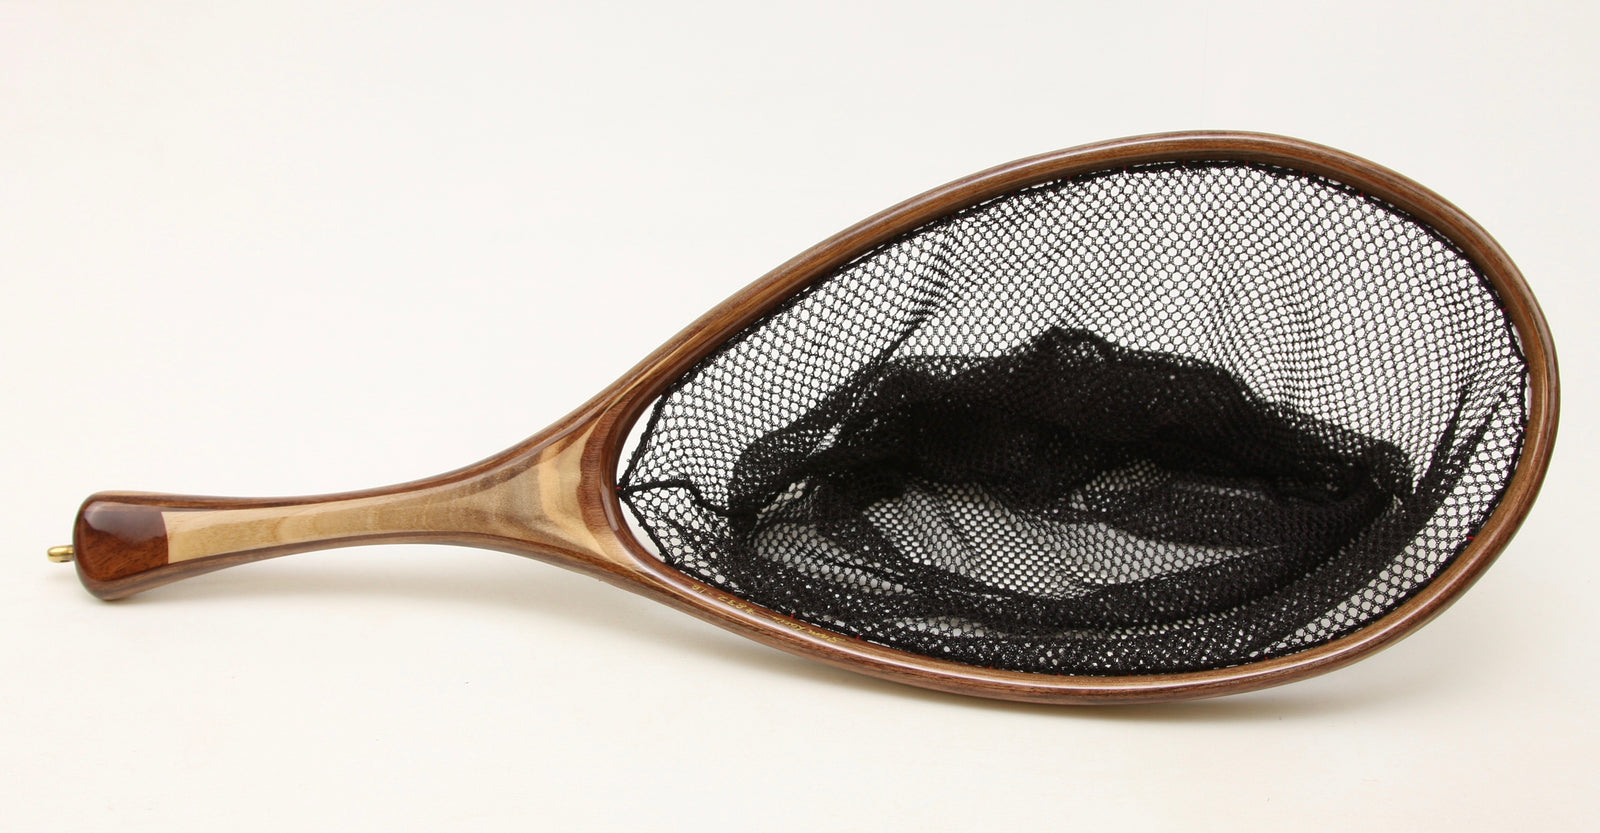 Fly Fishing Landing Net Wolf River Model Fine Wood Handcrafted in Wisconsin  Ready to Ship 5 Year Anniversary Gift 